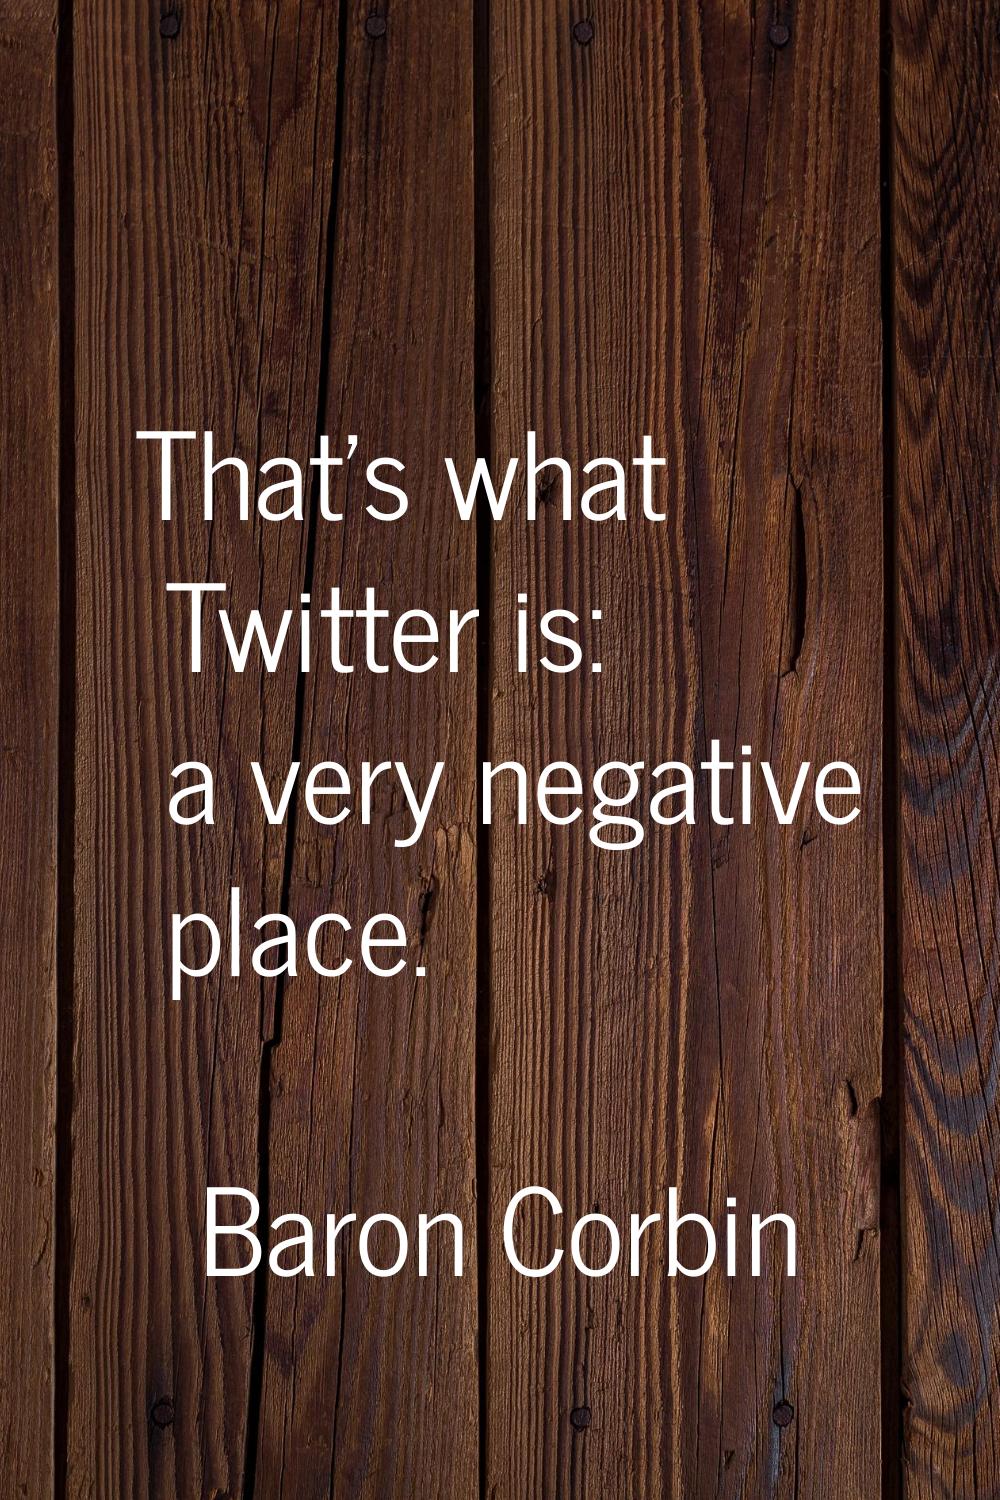 That's what Twitter is: a very negative place.